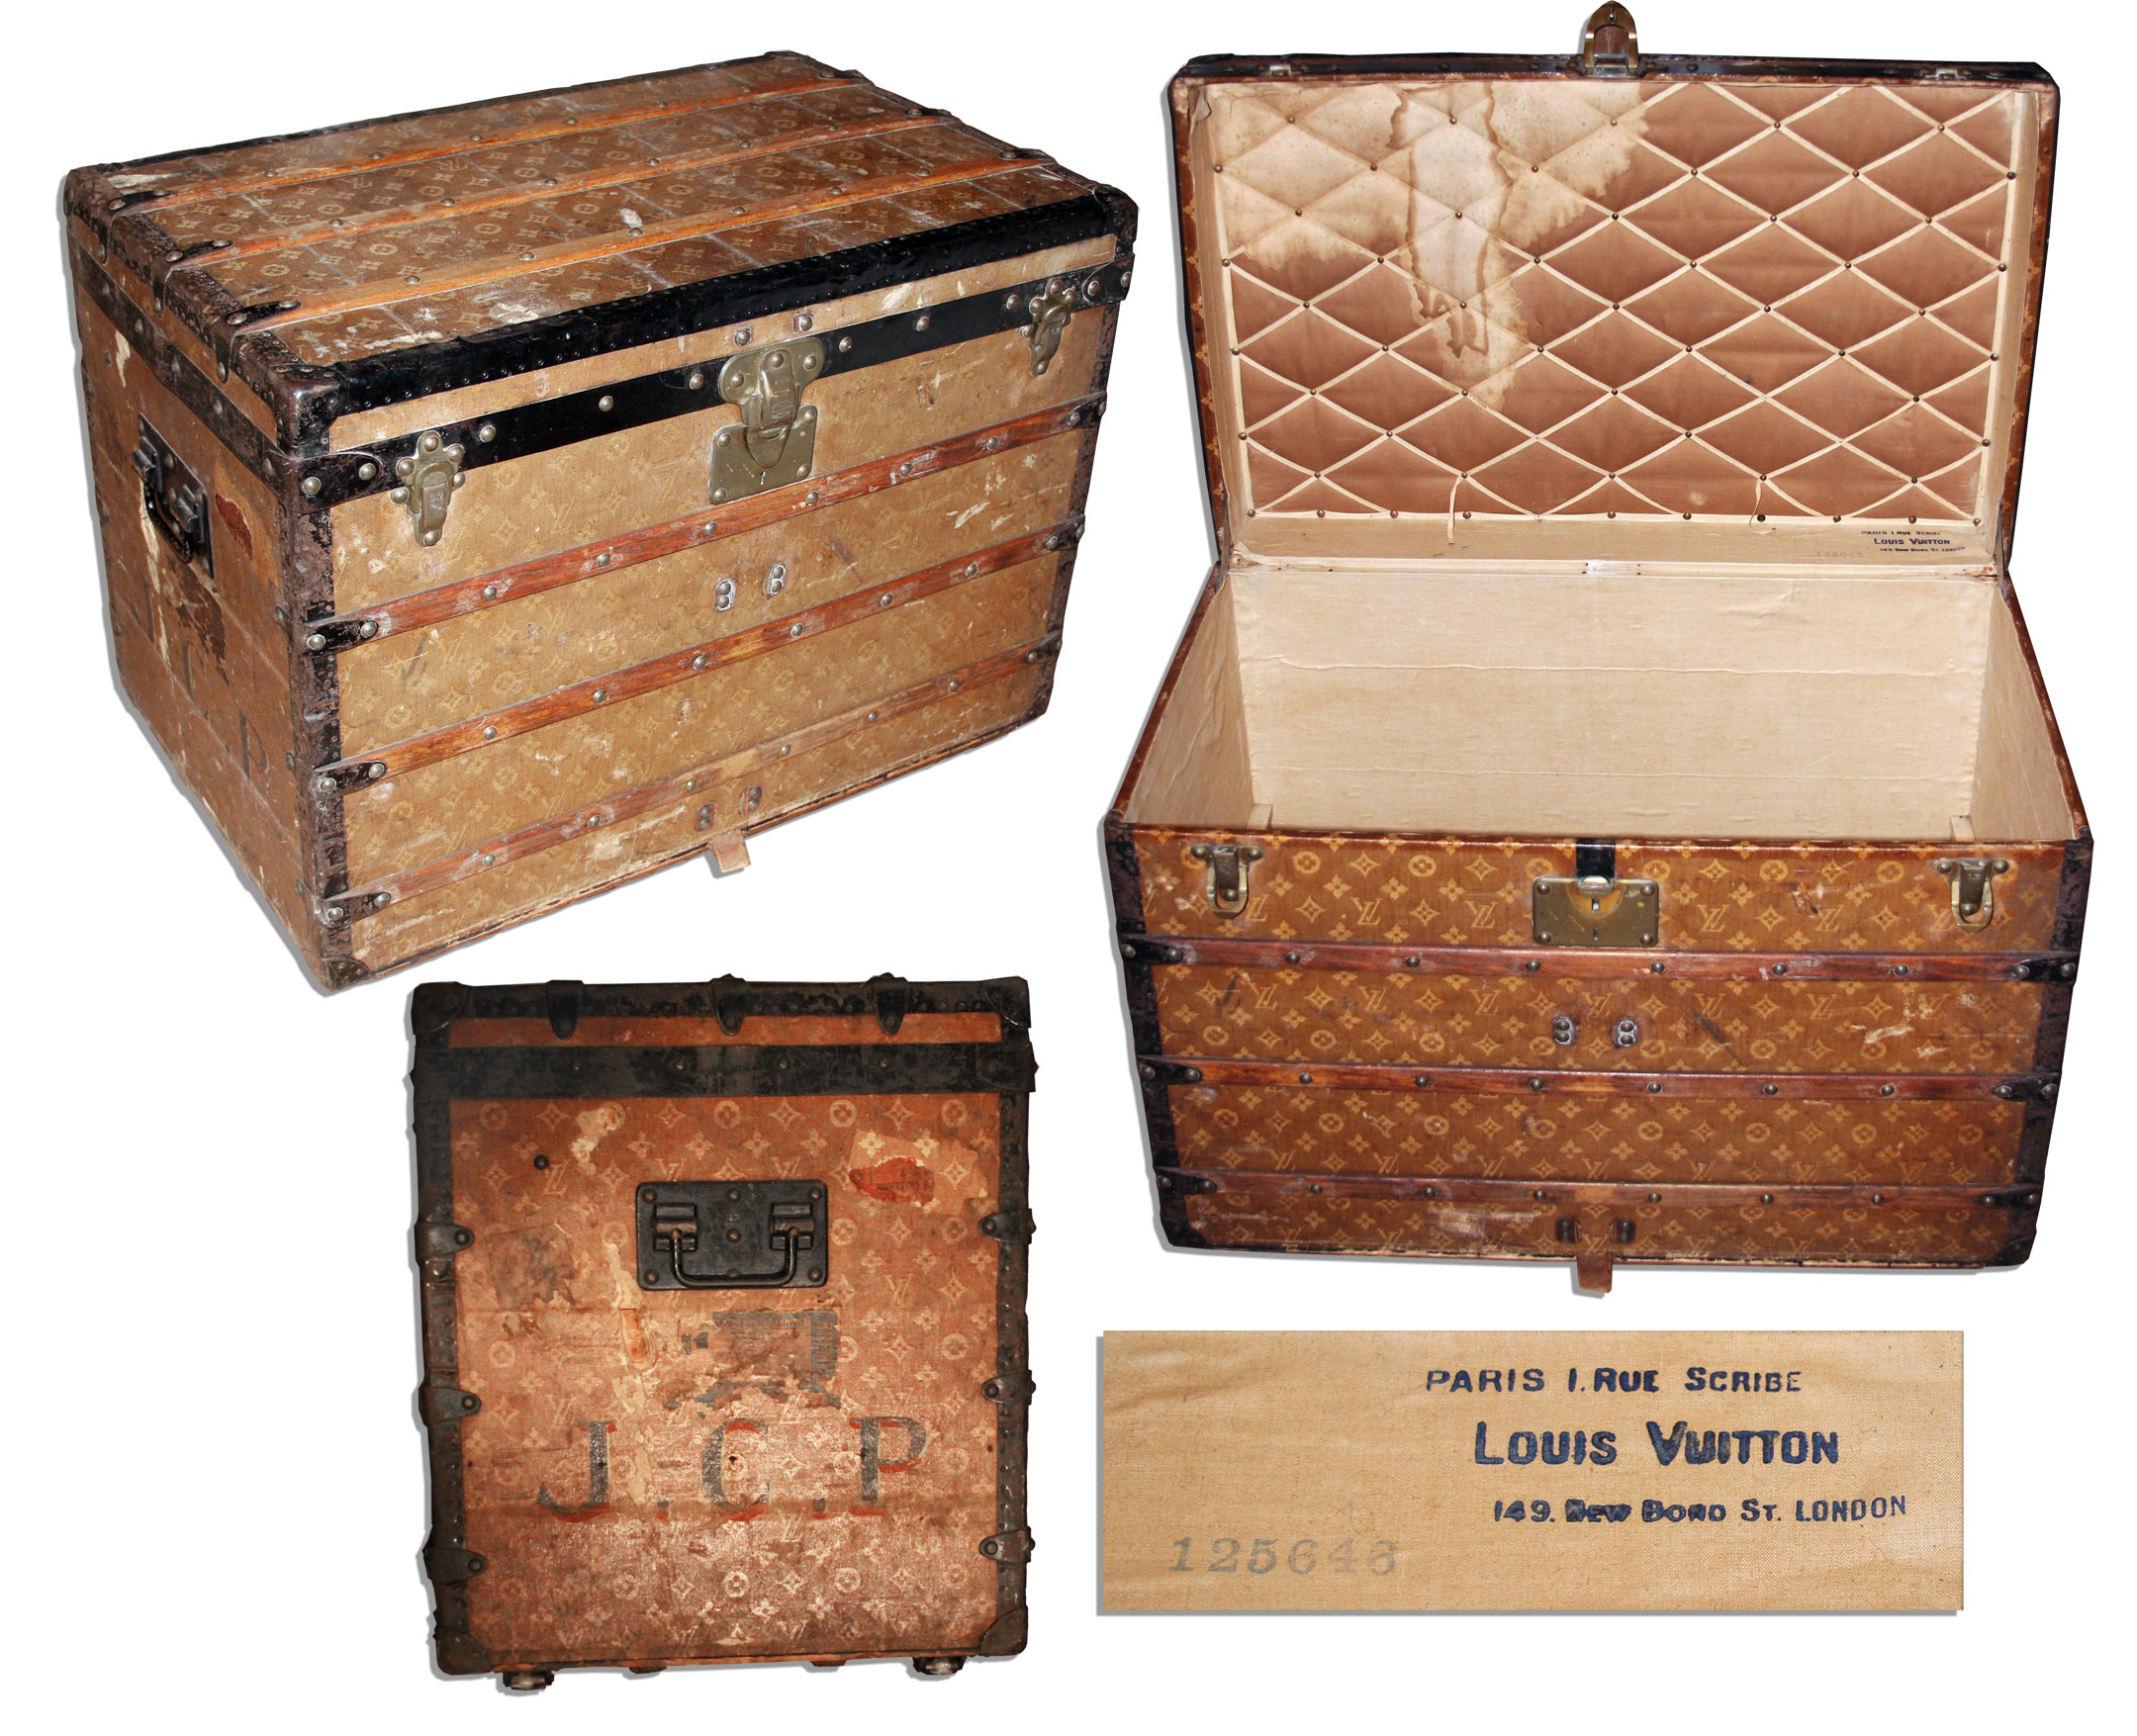 Sell Your Original, Vintage Louis Vuitton Trunk at Nate D. Sanders